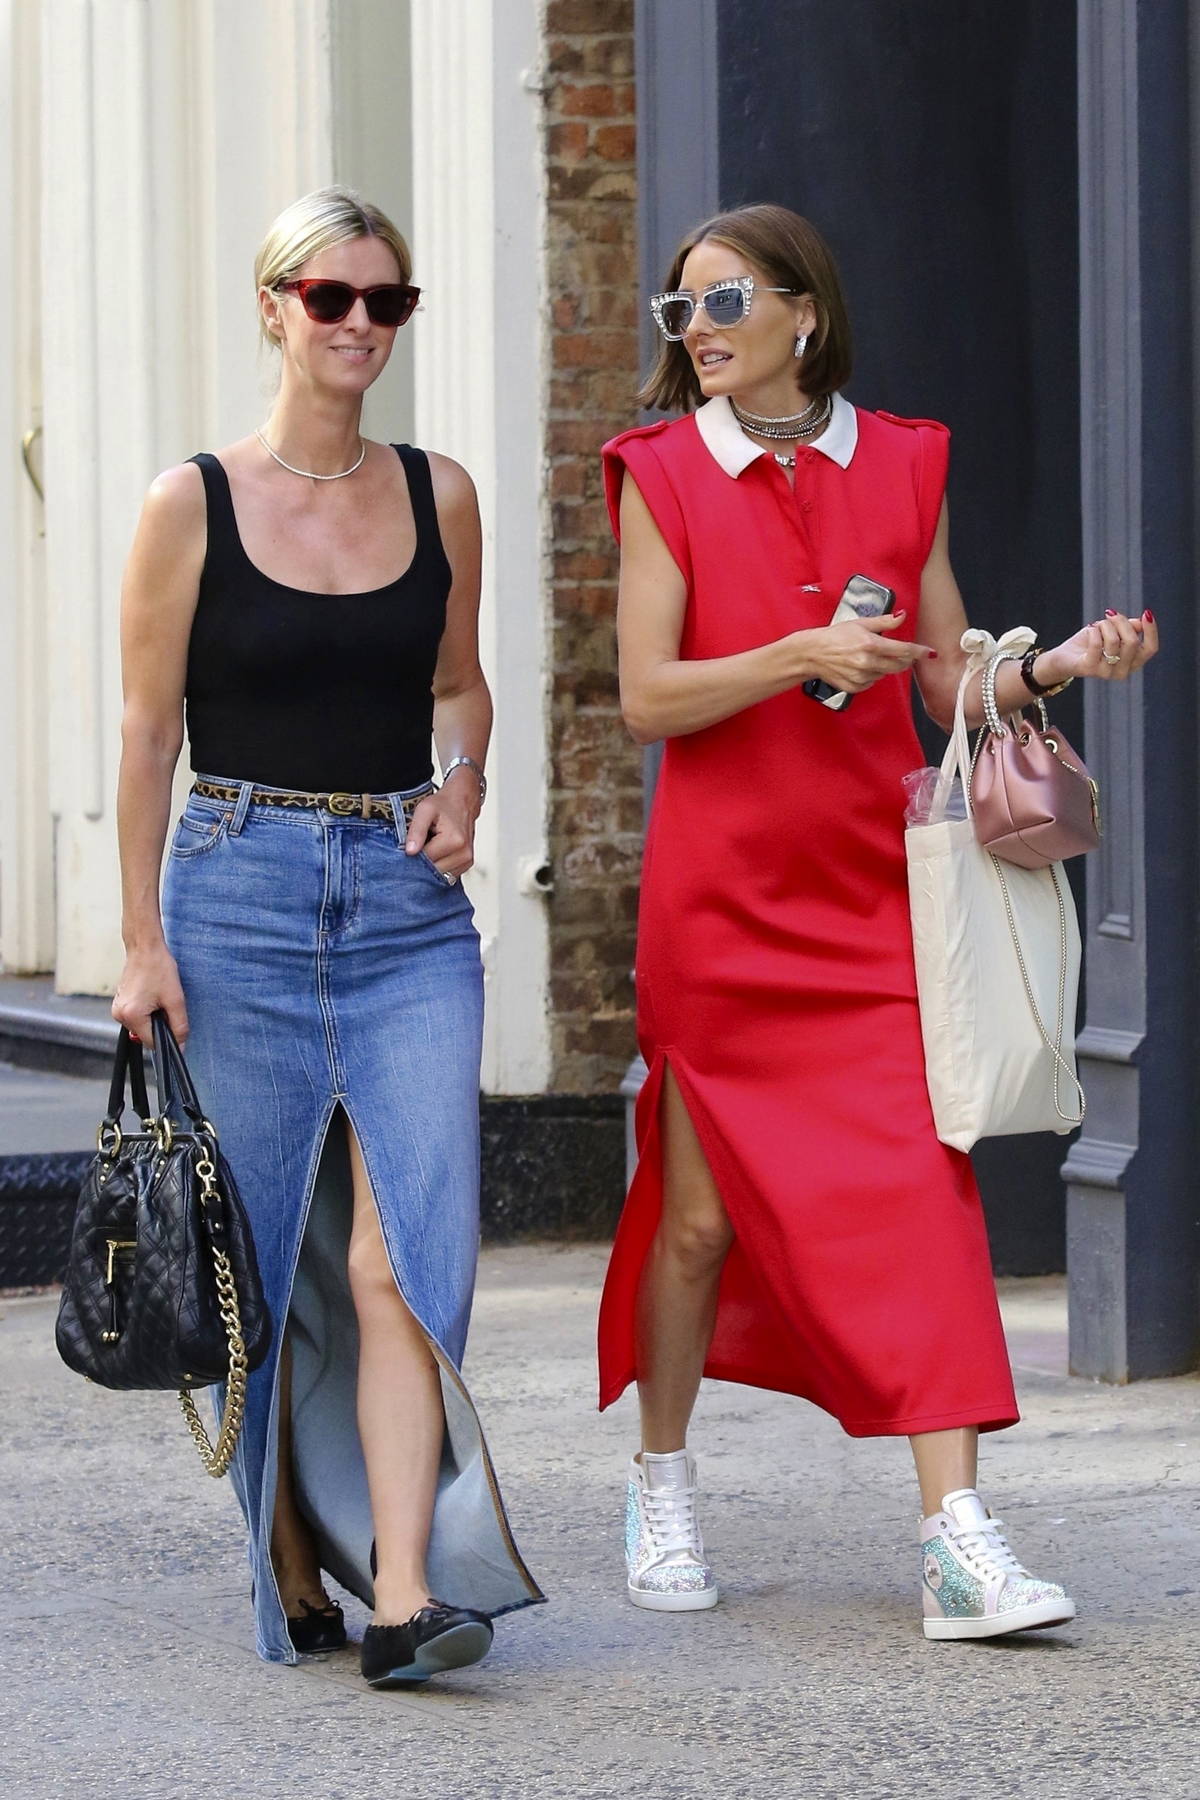 Nicky Hilton and Olivia Palermo Enjoy a Shopping Day in N.Y.C.